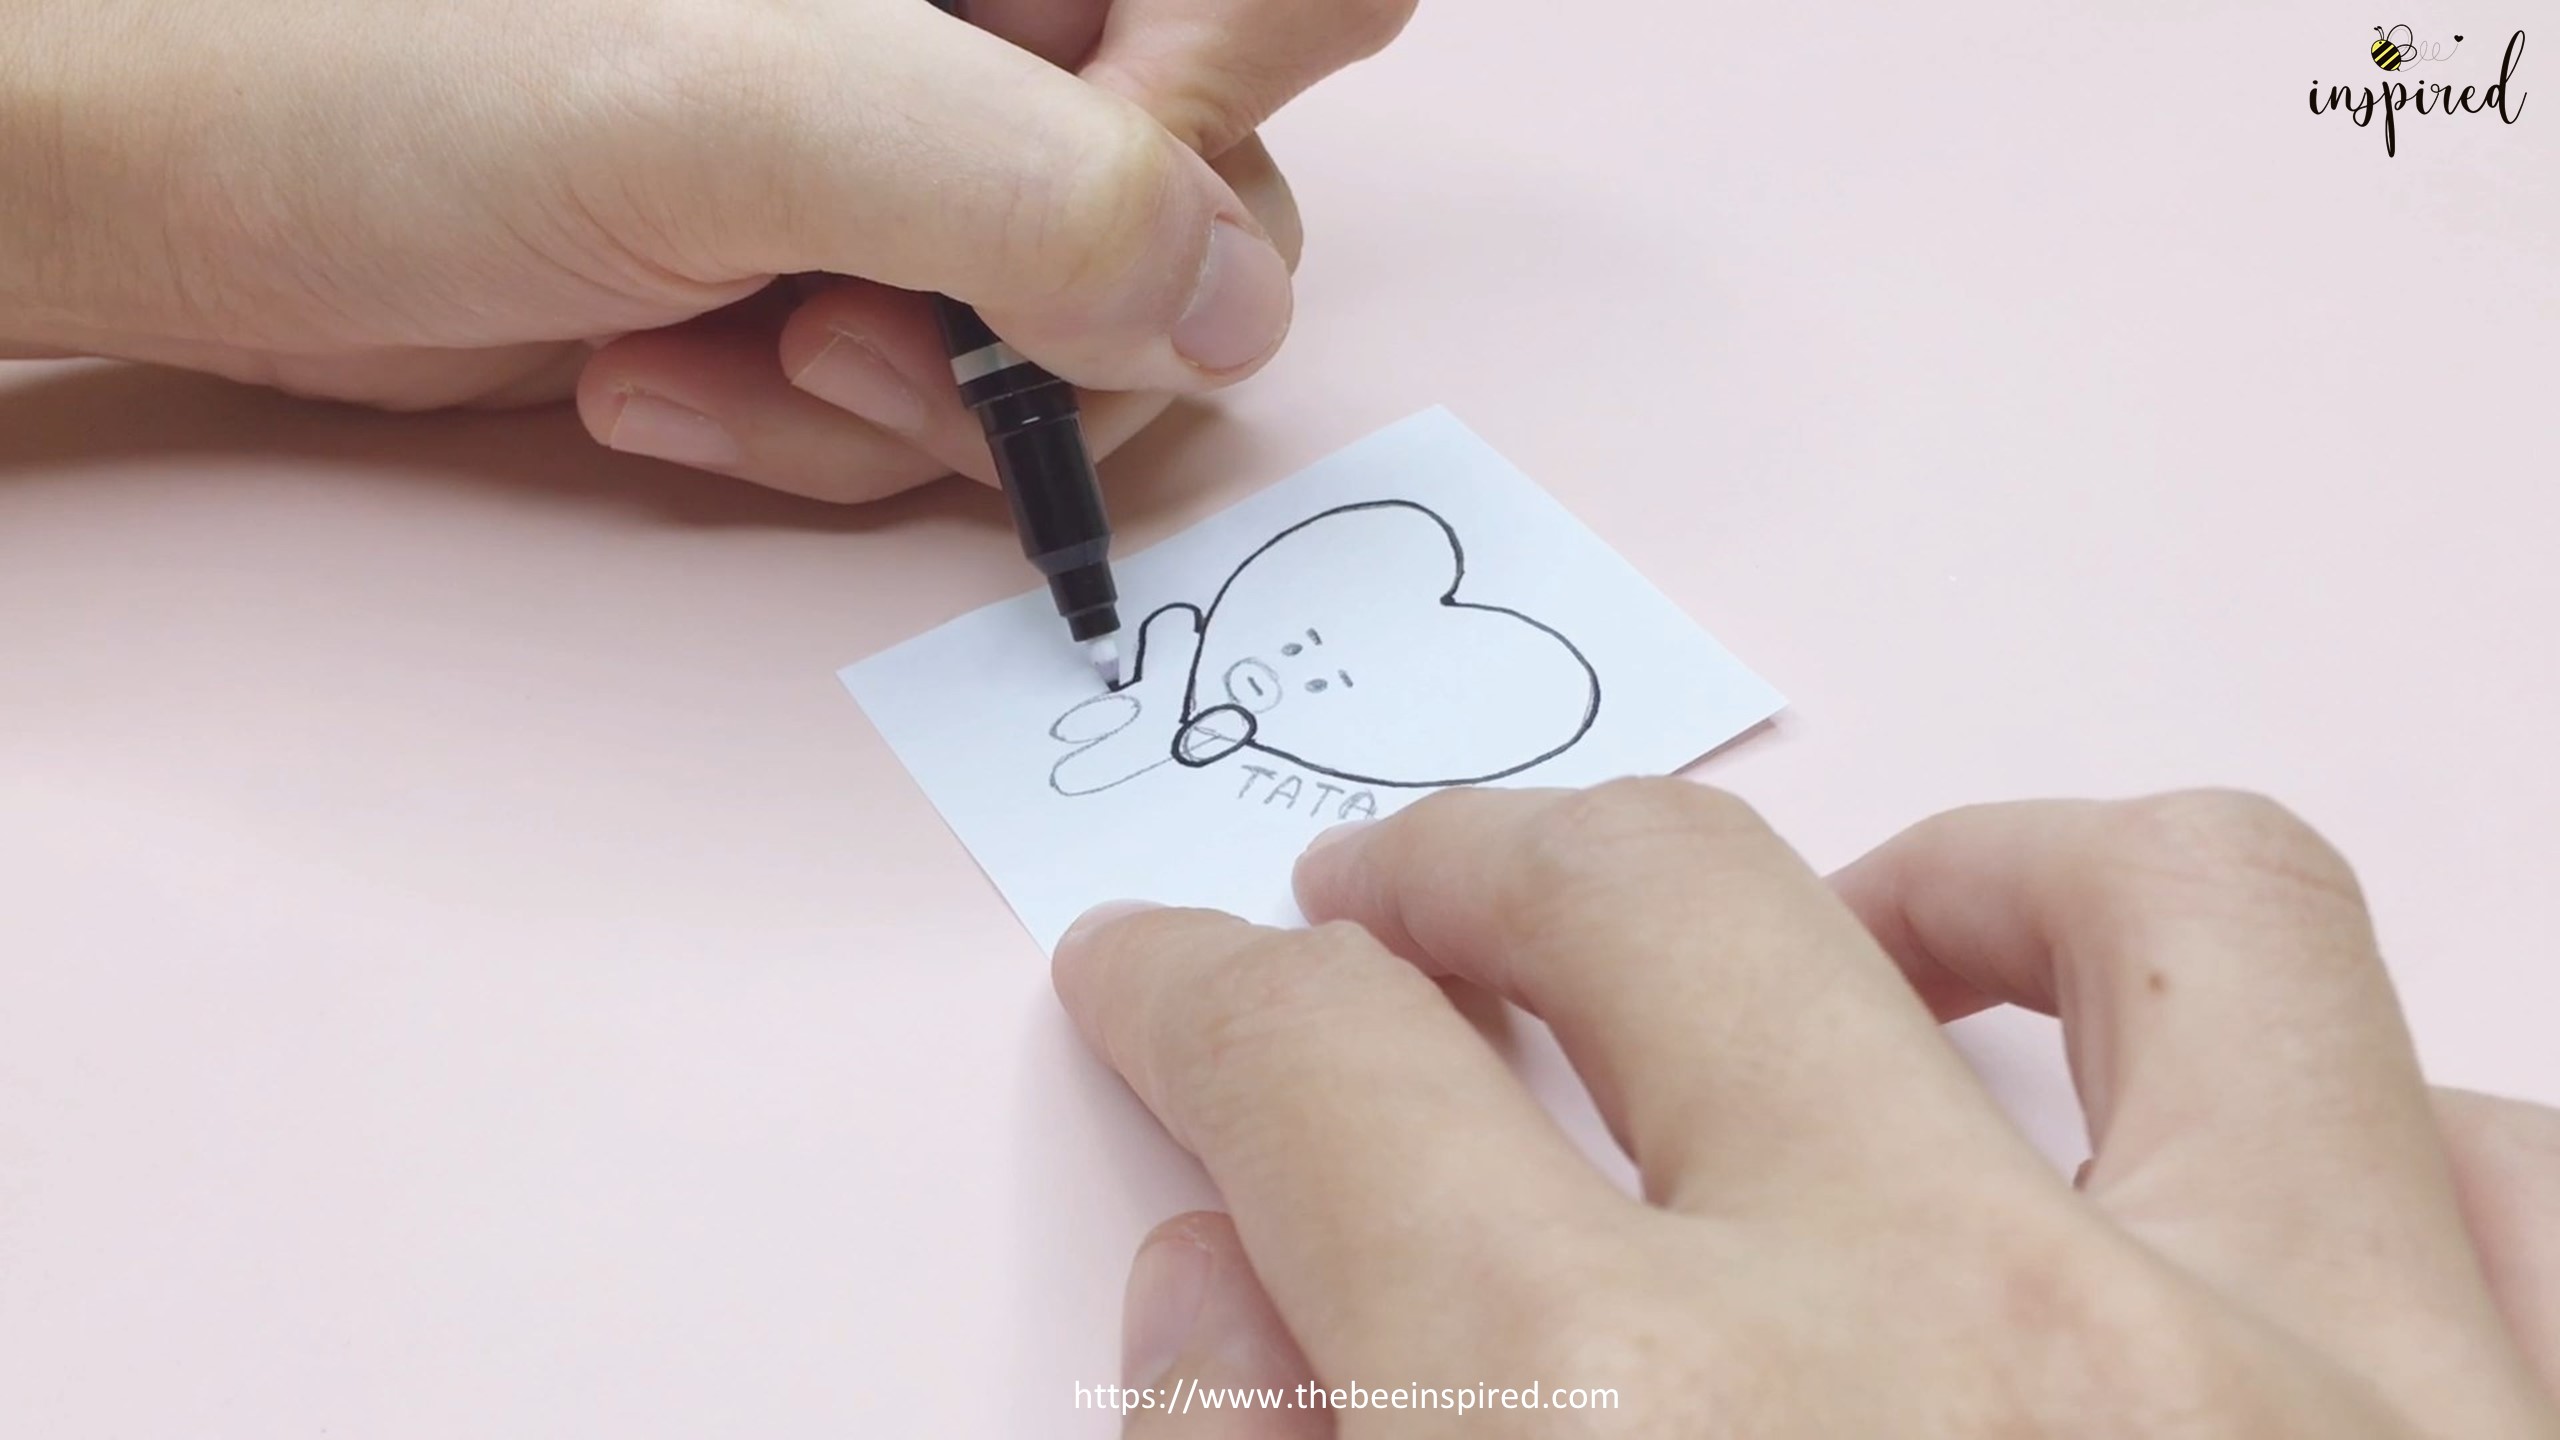 How to Make BTS Sticker from My Drawing without Sticker Paper_4